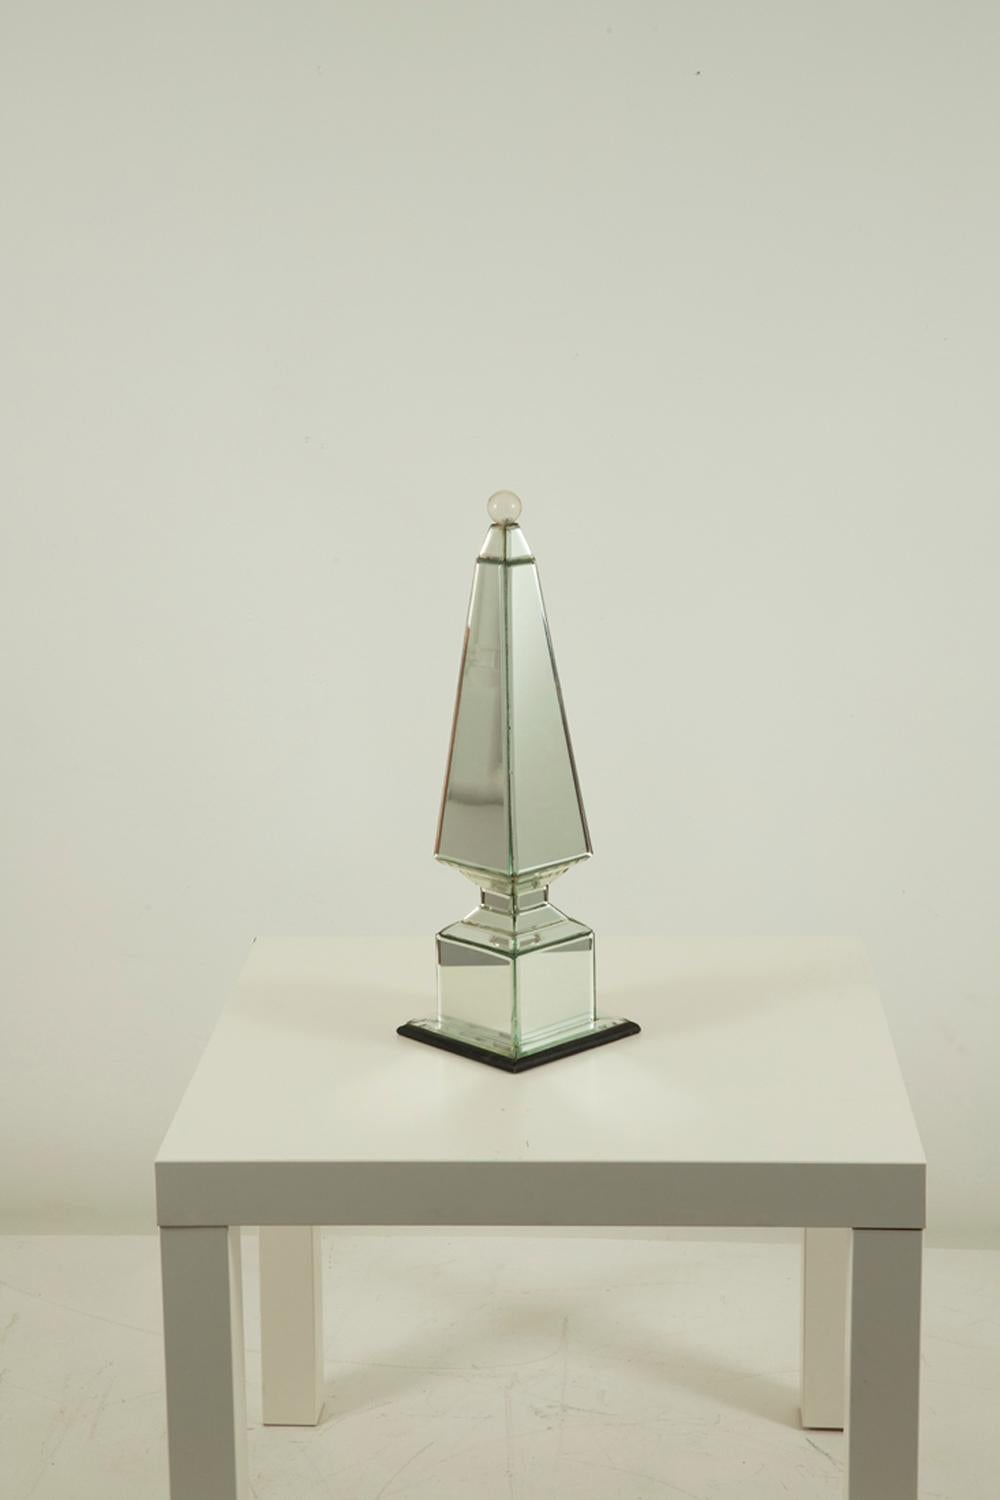 20th Century Serge Roche Mirrored Obelisk with Crystal Ball Finial For Sale